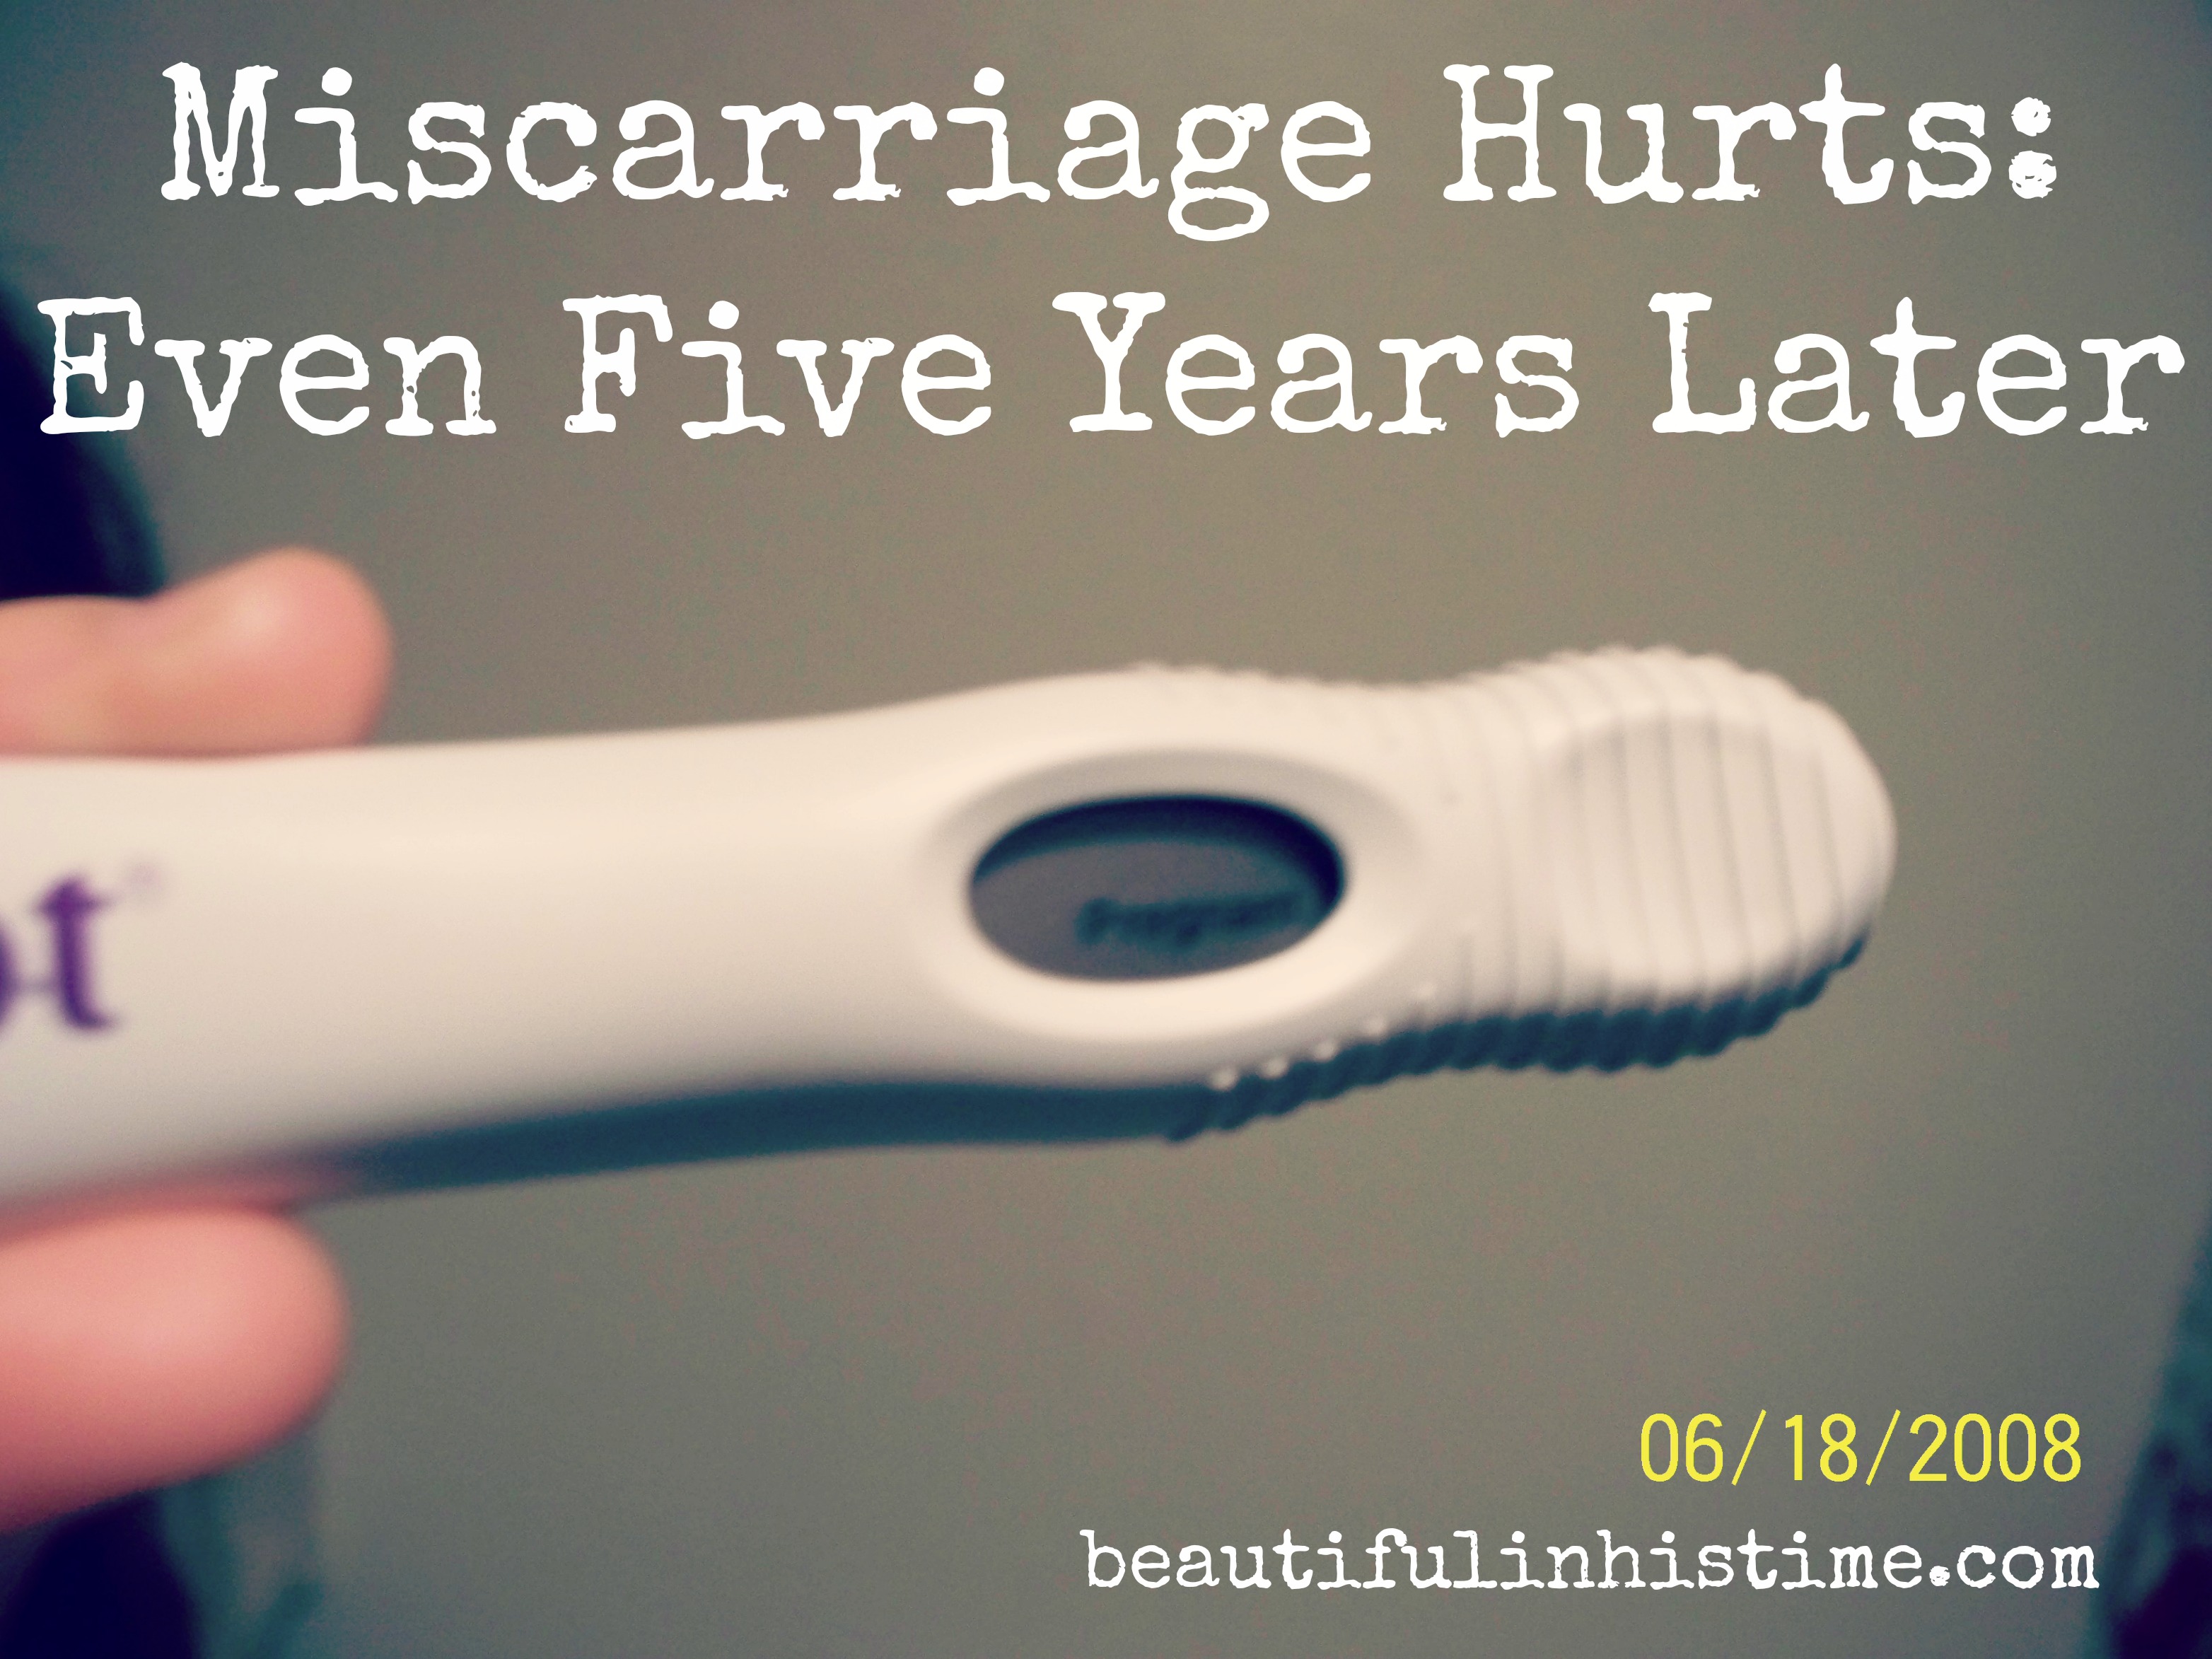 Miscarriage hurts: even five years later #miscarriage